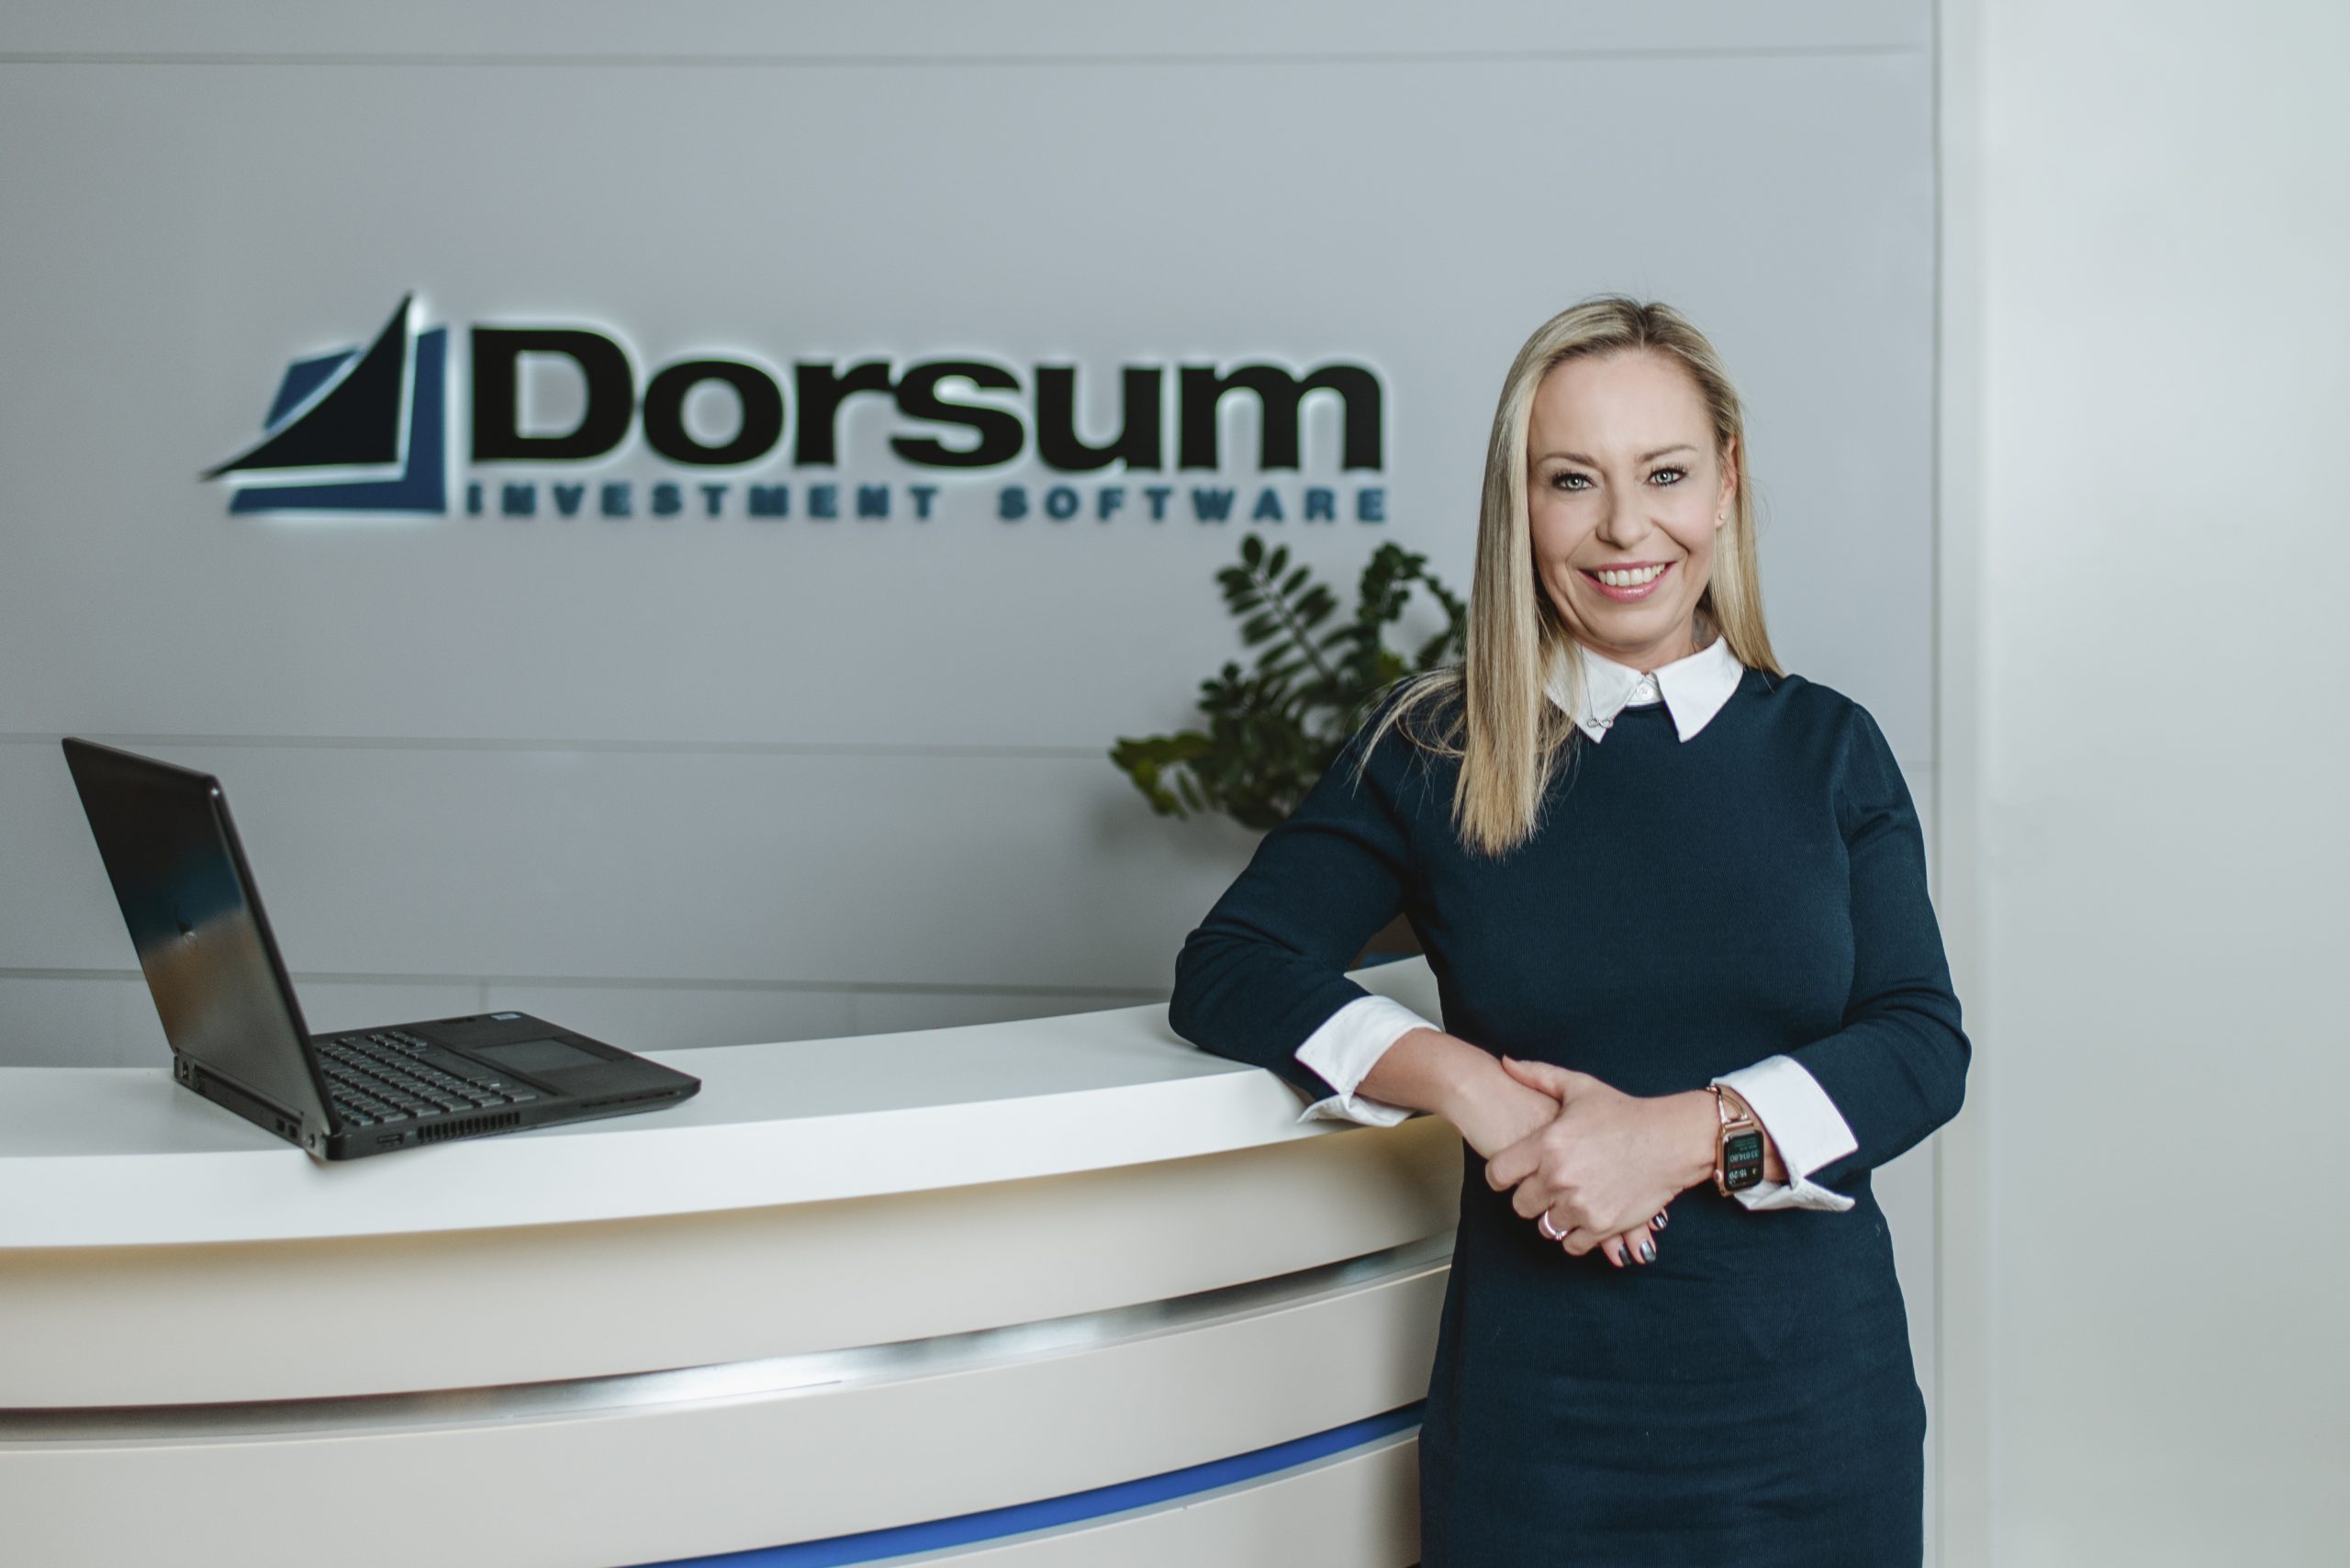 Women bring new perspectives to IT – Dorsum joins Fintech Sparks’ “Women in Finance” initiative